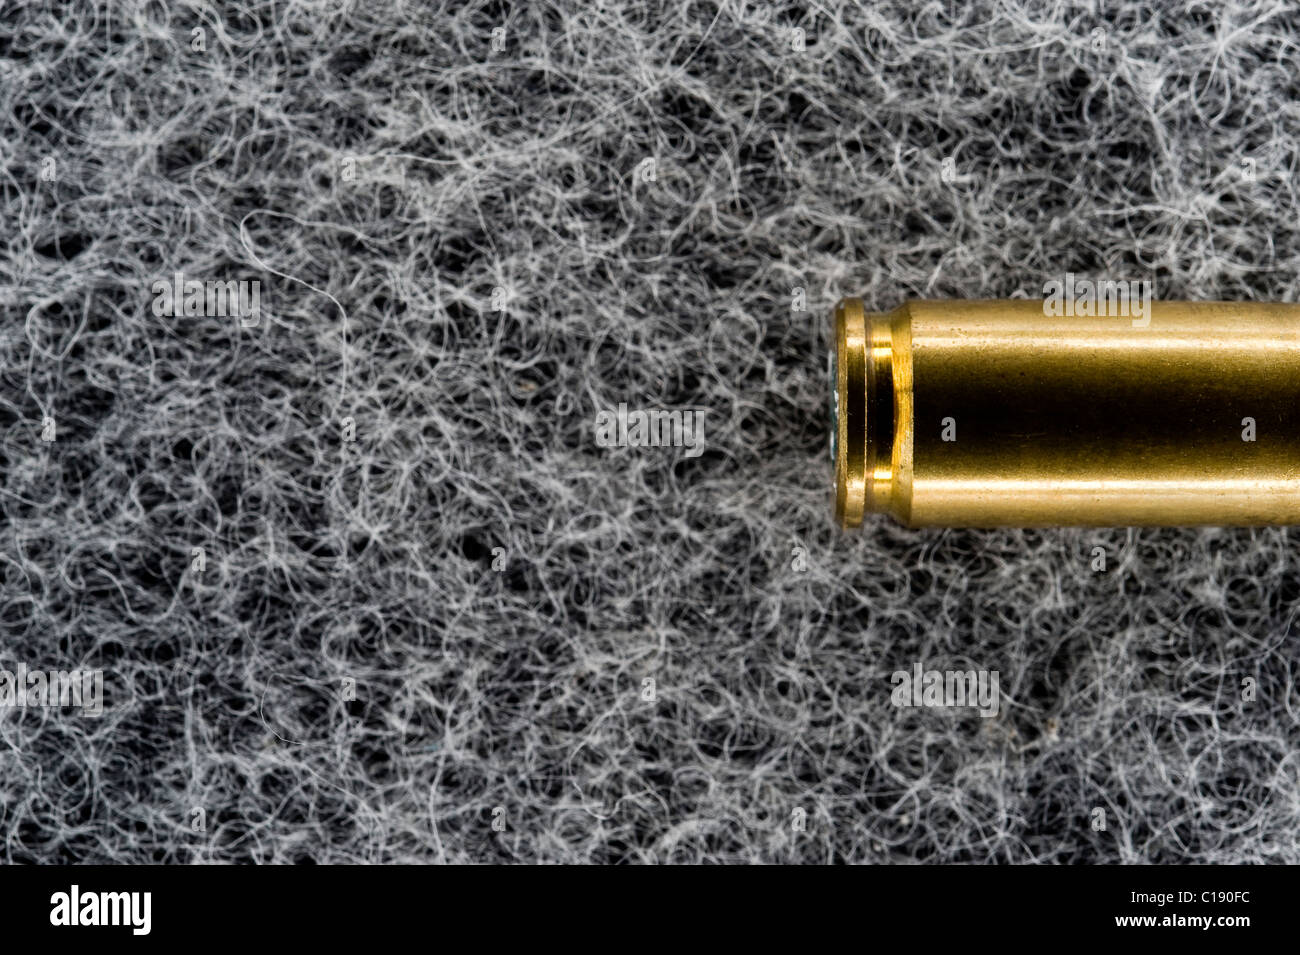 Bullet case on a soft surface Stock Photo